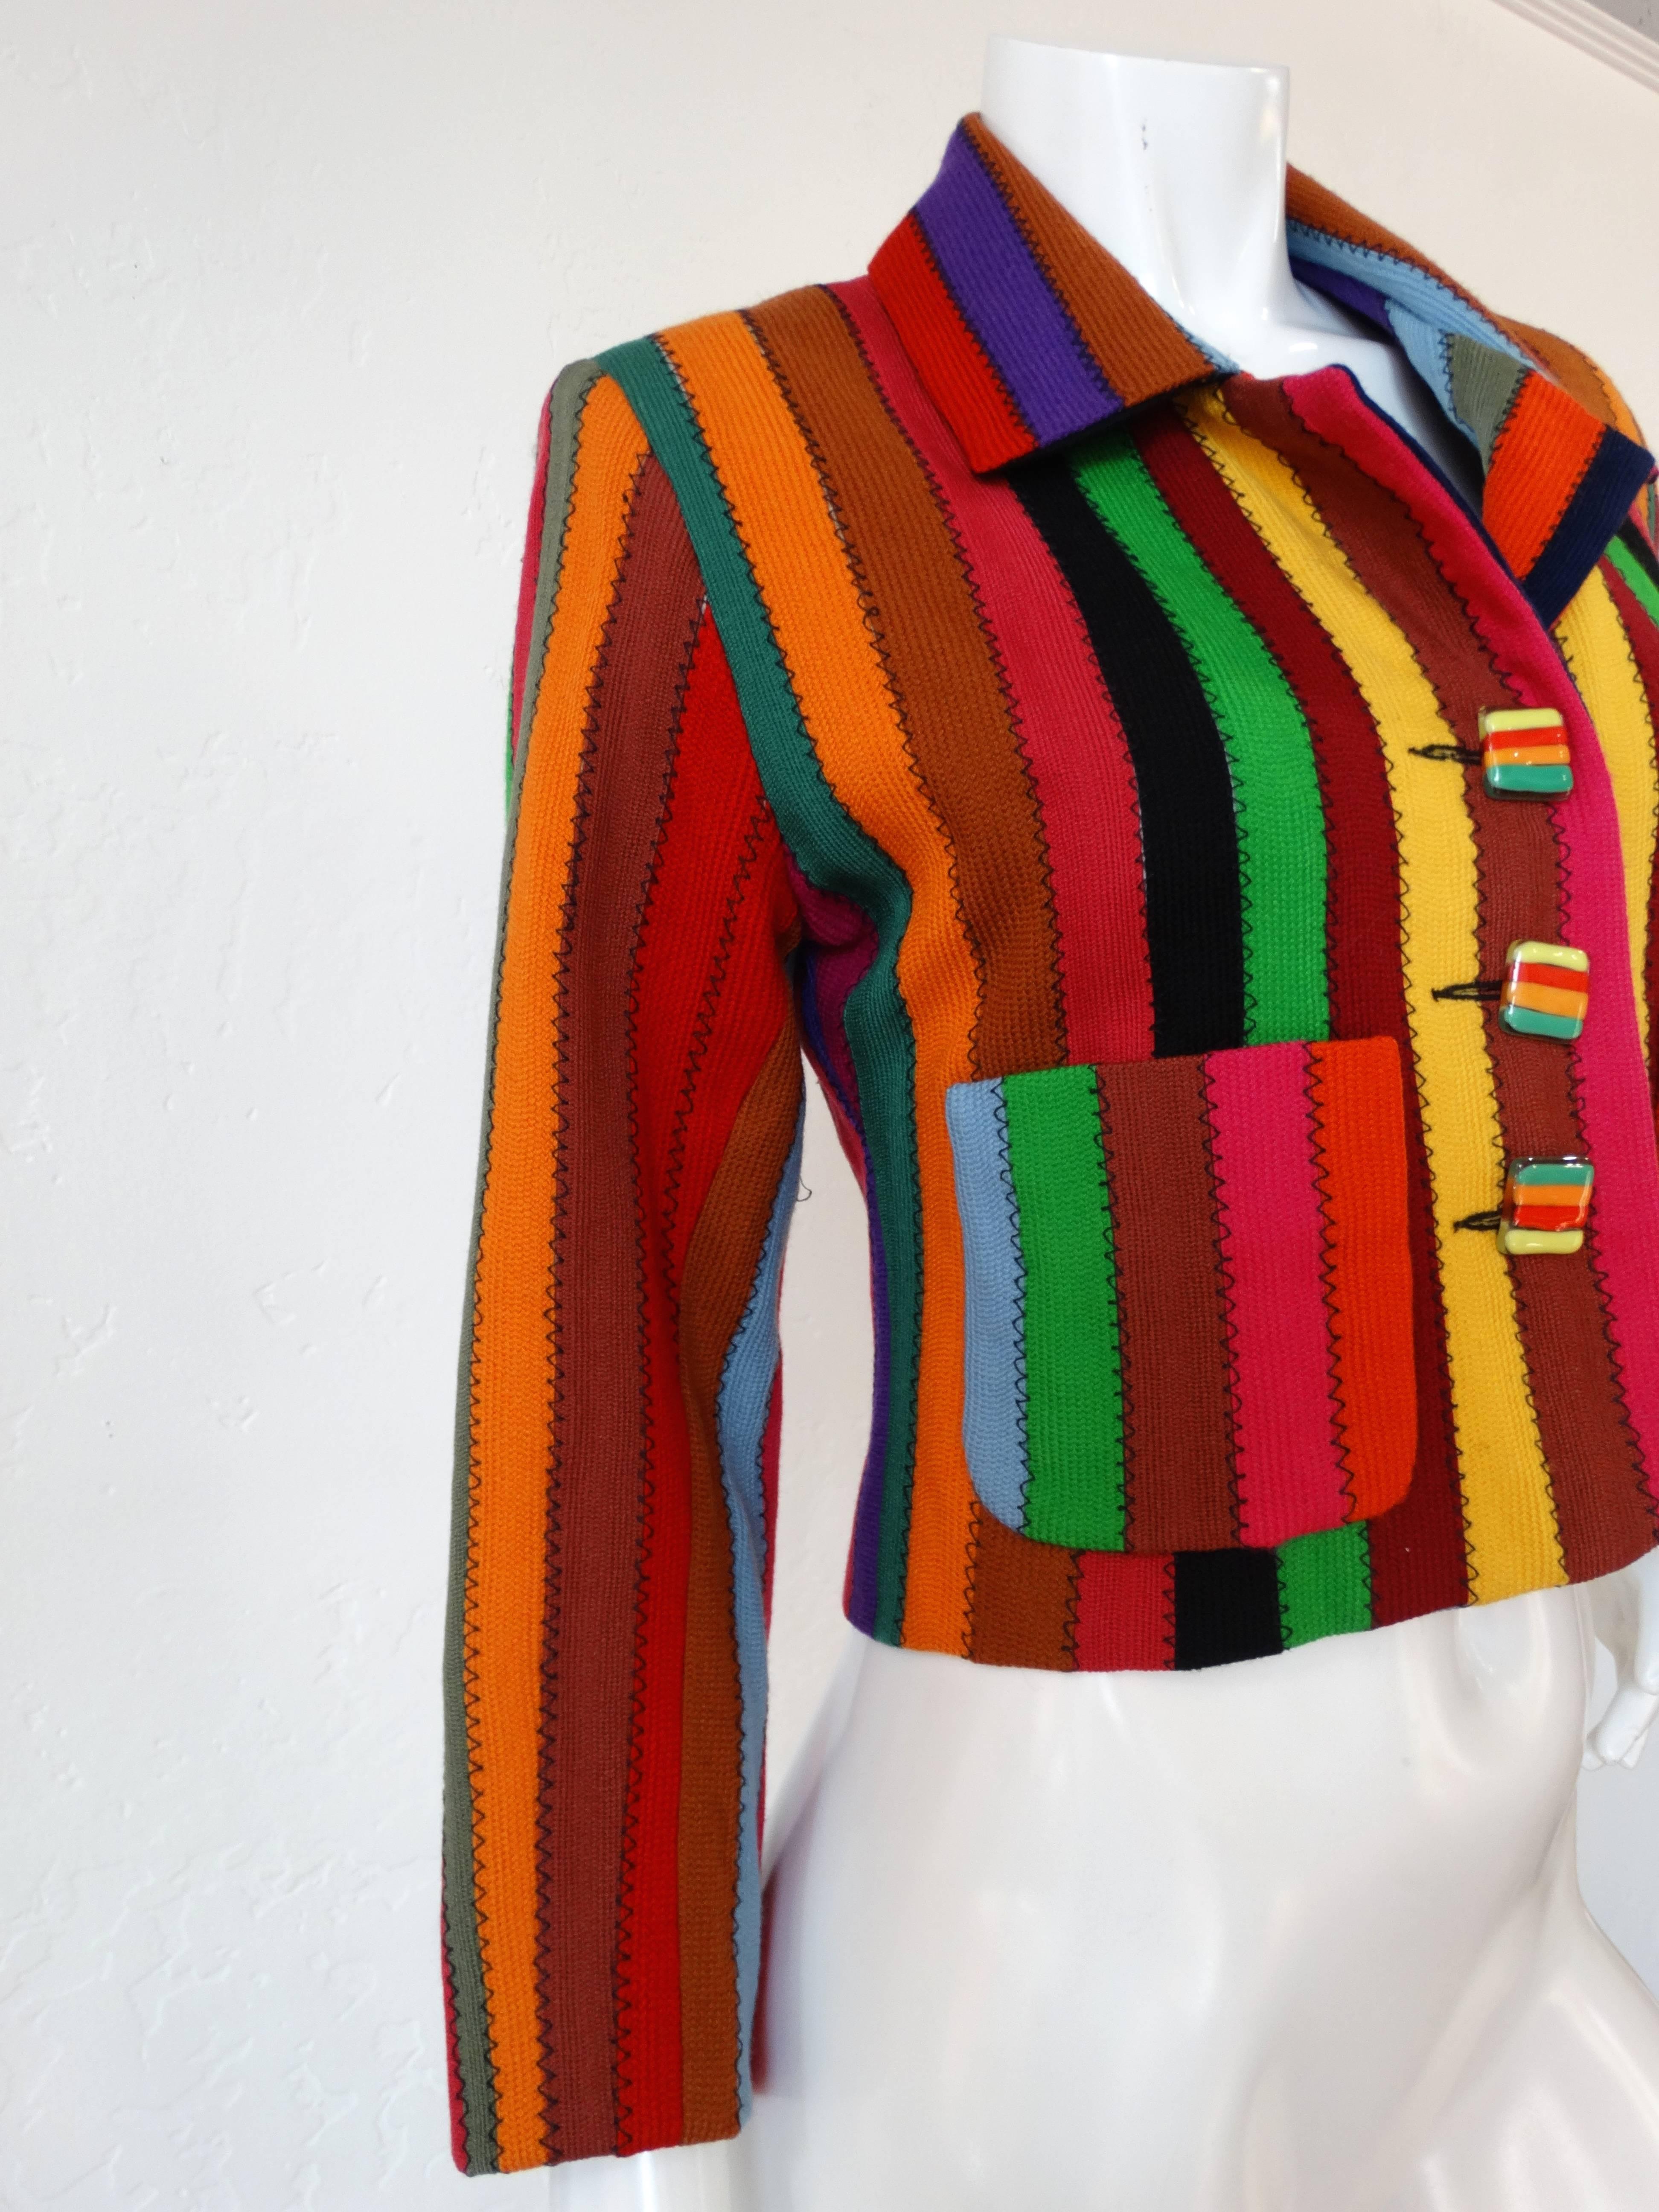 For the lover of stripes this Todd Oldham 1990's Jacket is for you! Buttons up the front with square hand blown glass buttons. Striped cropped blazer/jacket with two front pockets and fully lined. Made in the USA this jacket is a size 4 bust 34